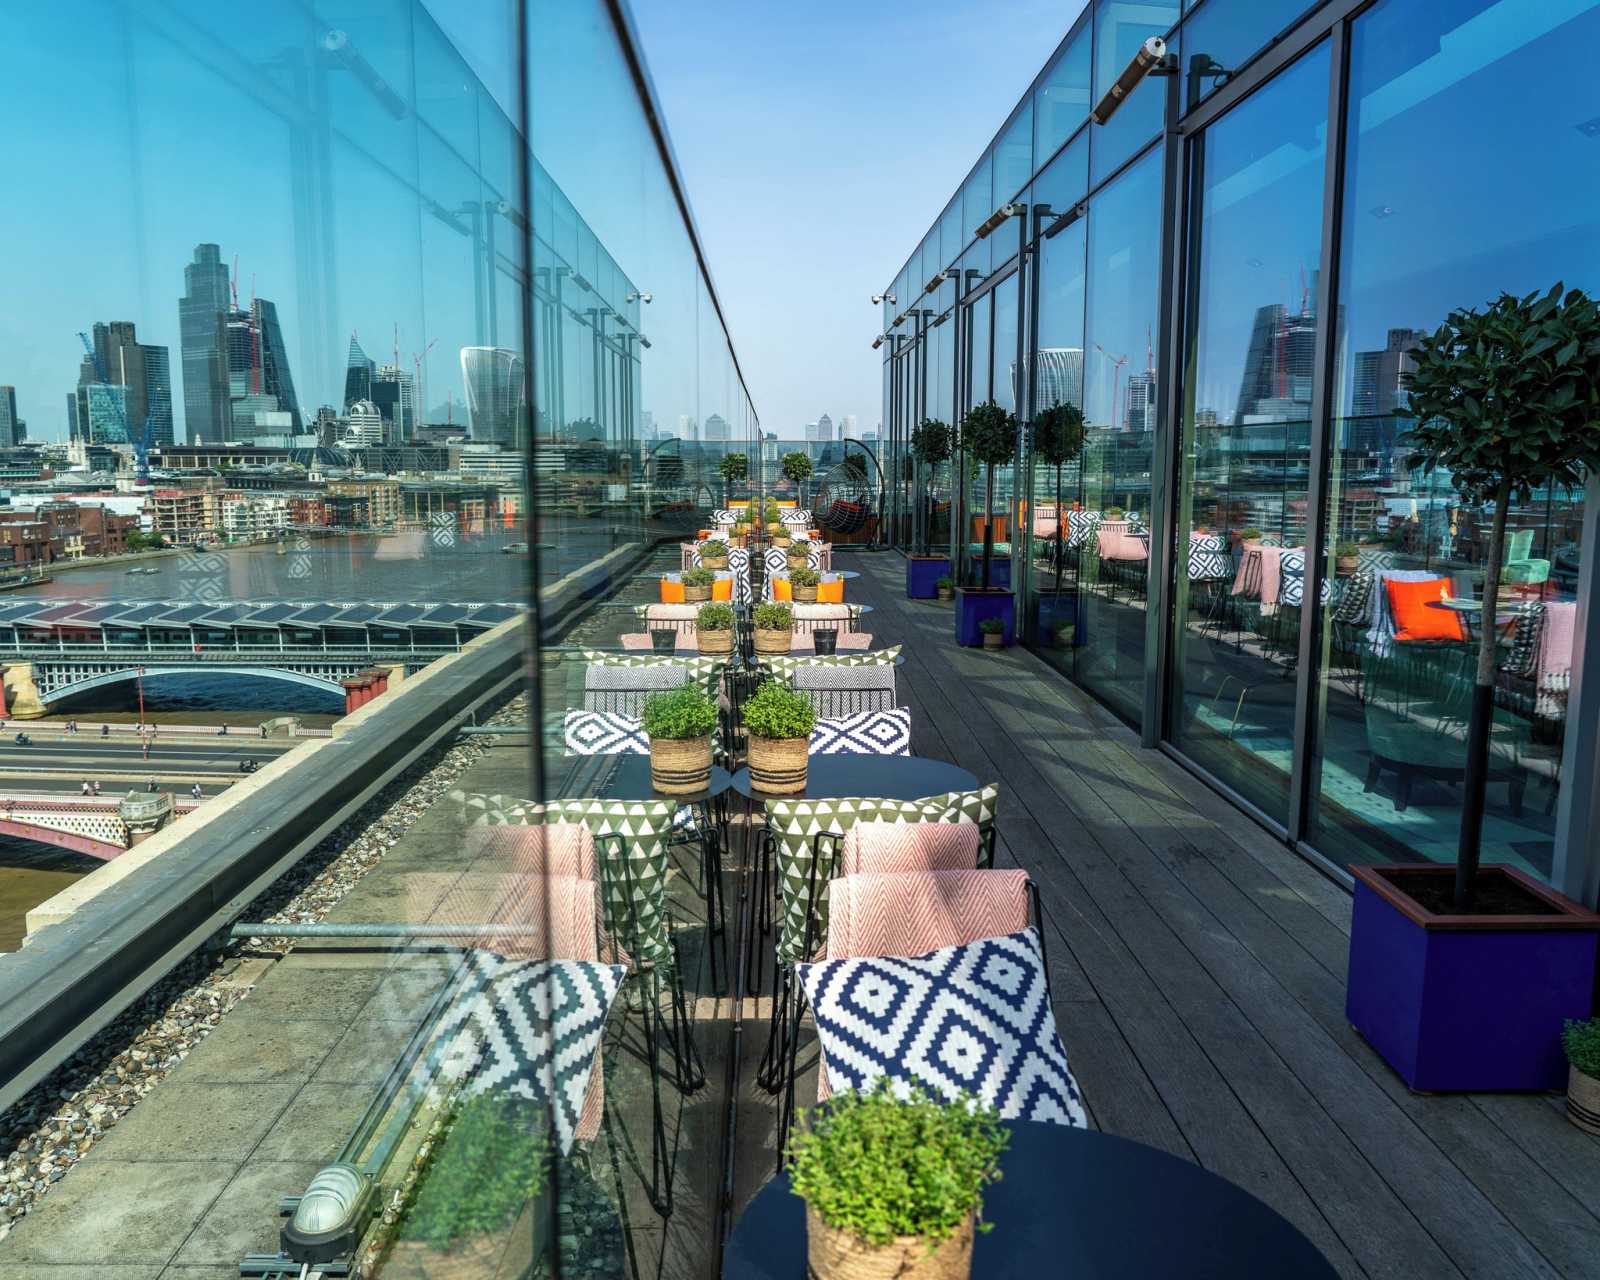 Rooftop 12th Knot - Sea containers in London